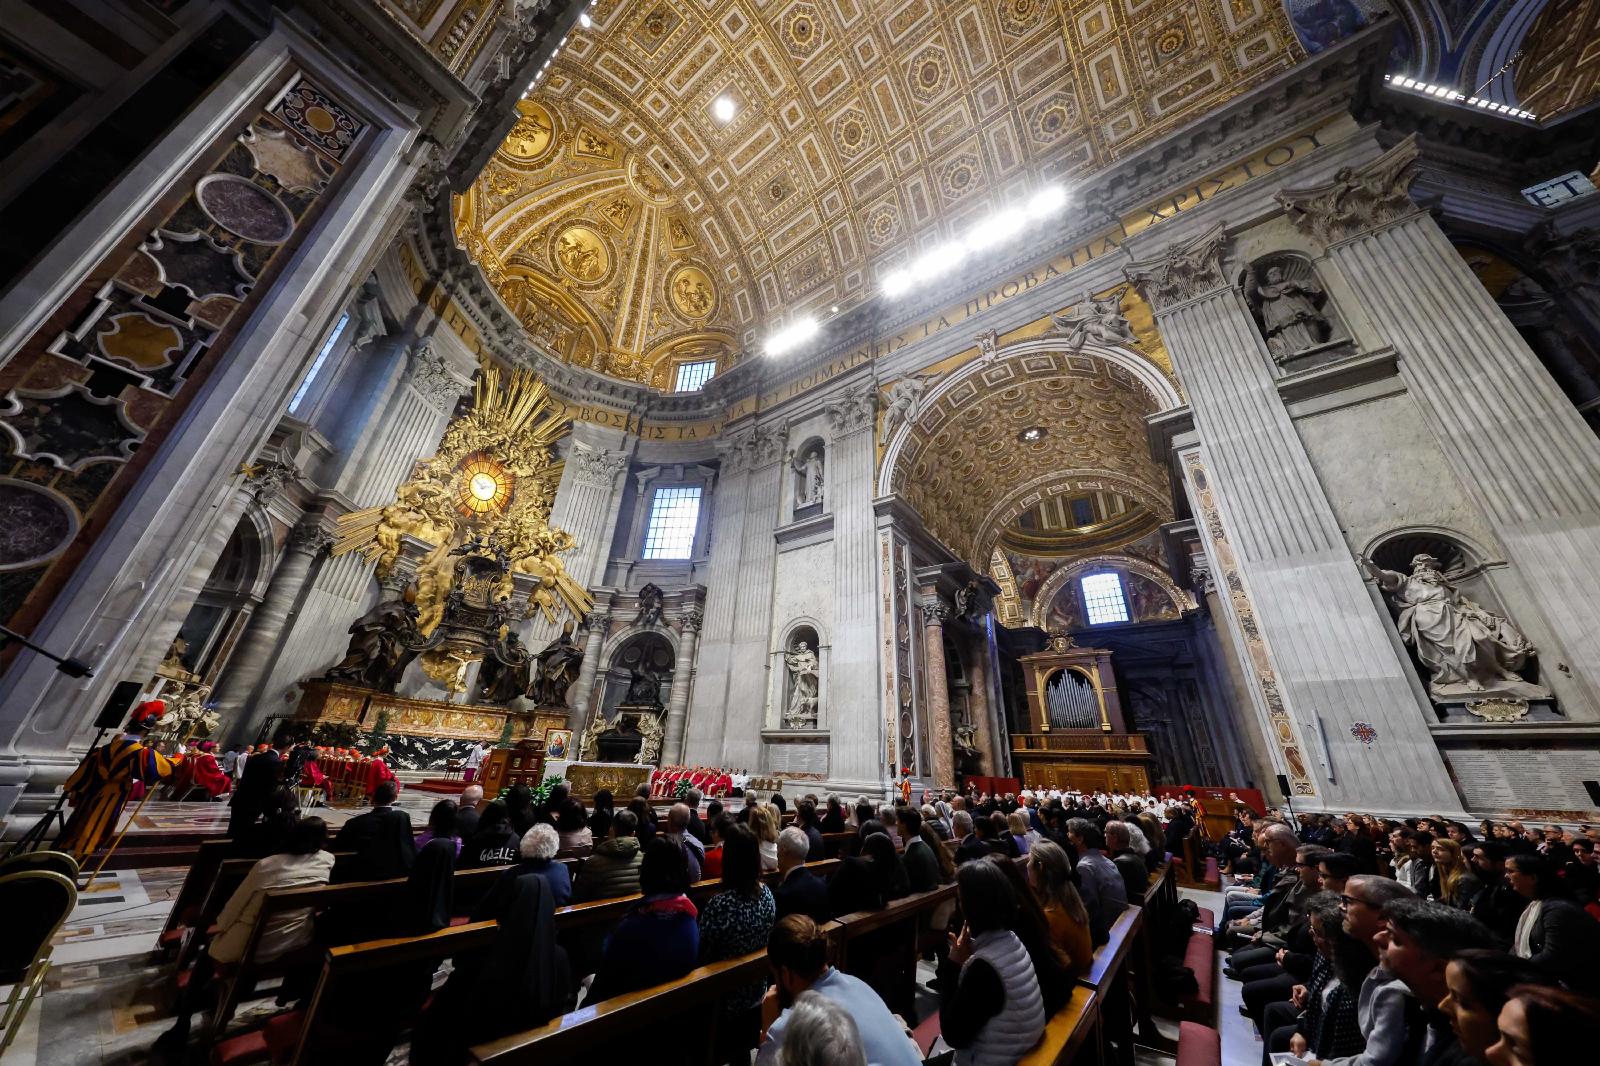 Mass in St. Peter's Basilica